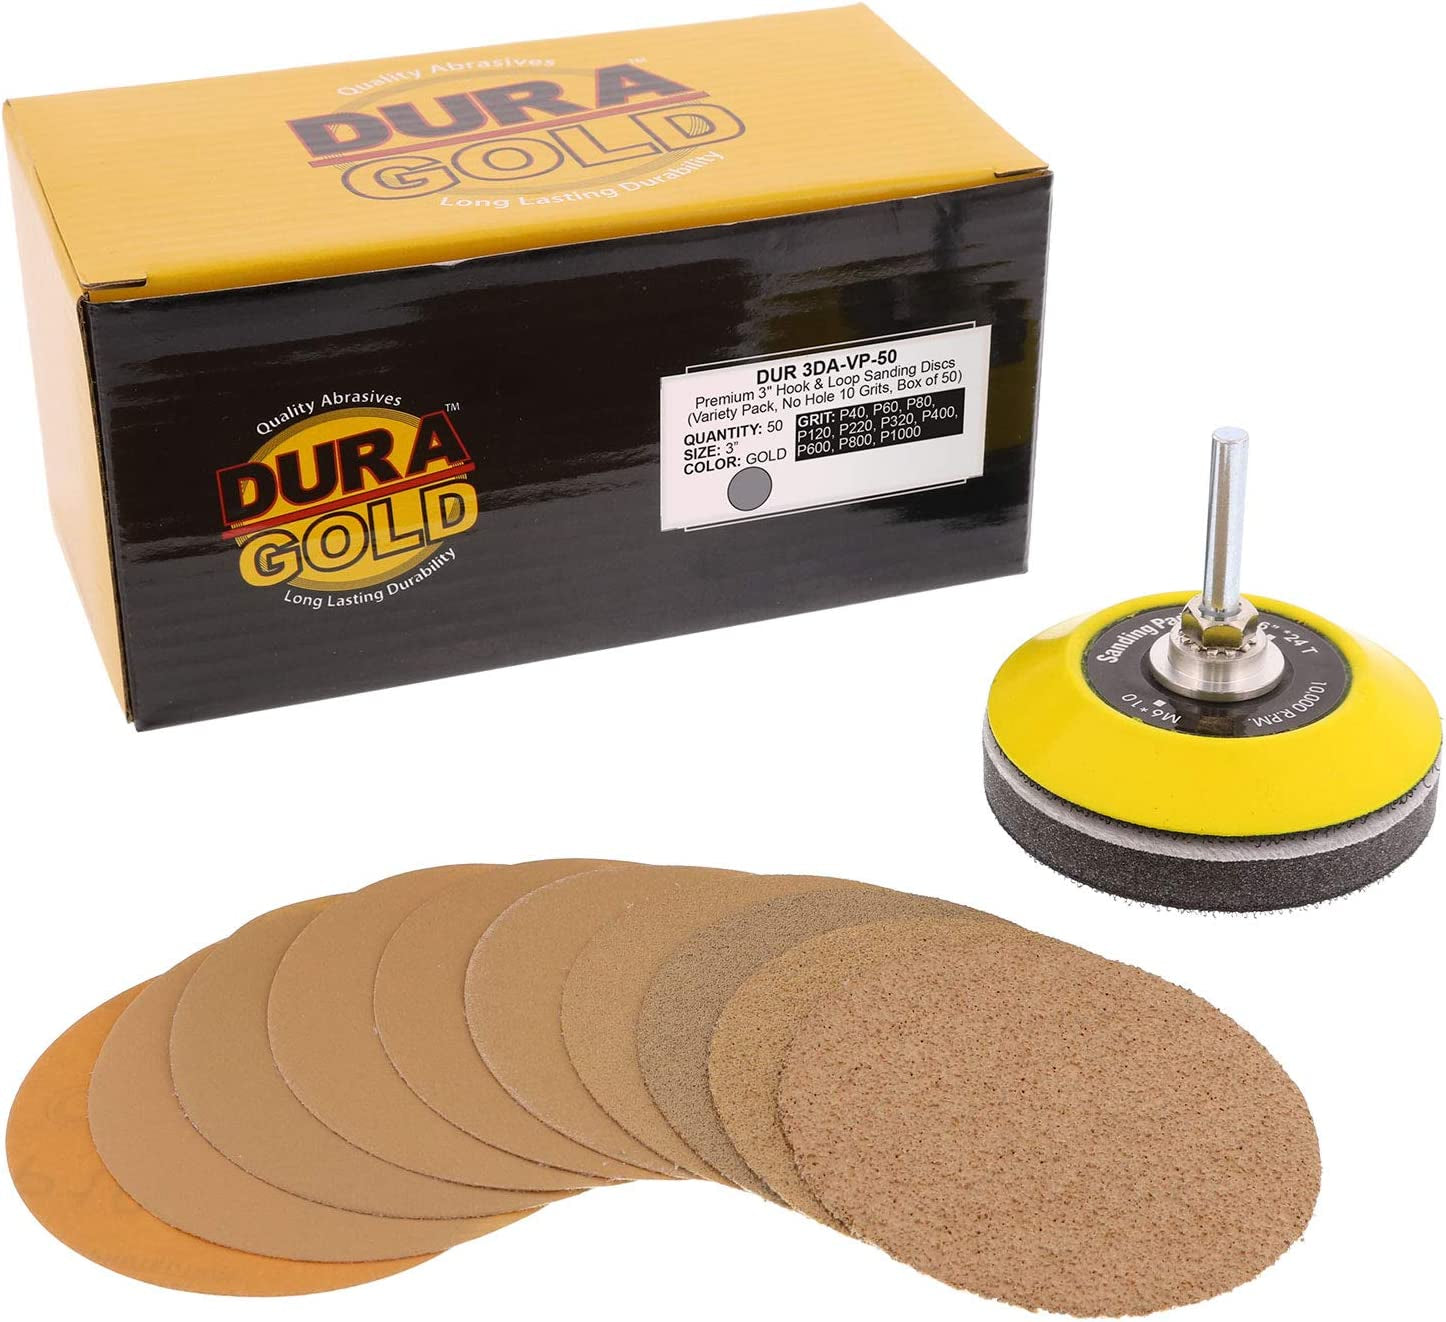 Dura-Gold, Dura-Gold - Premium - Variety Pack (40,60,80,120,220,320,400,600,800,1000) - 3" Gold Hook & Loop Sanding Discs for DA Sanders - Box of 50 Sandpaper Finishing Discs for Automotive and Woodworking